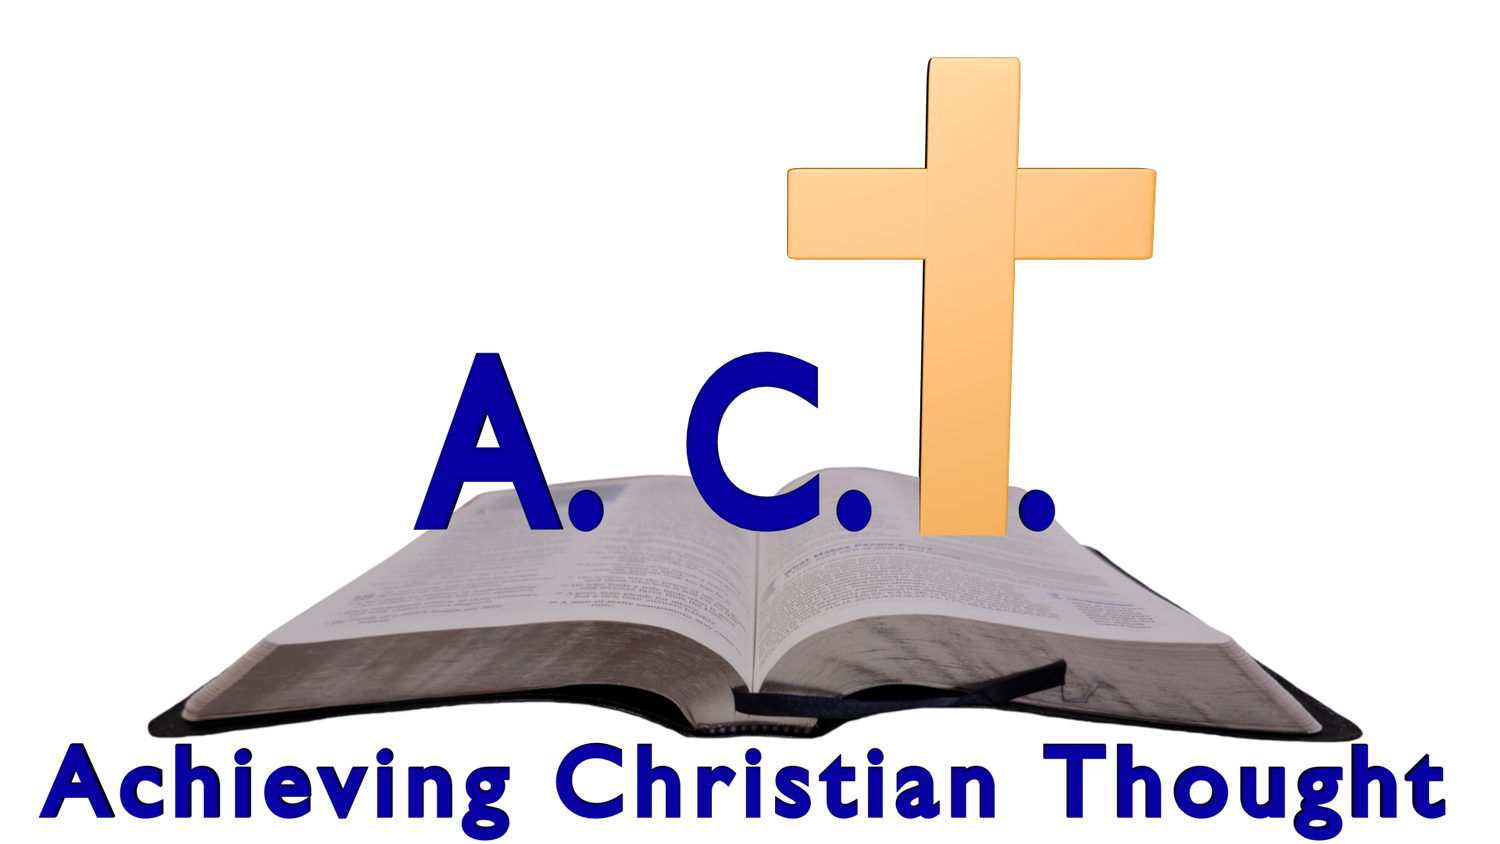 Achieving Christian Thought